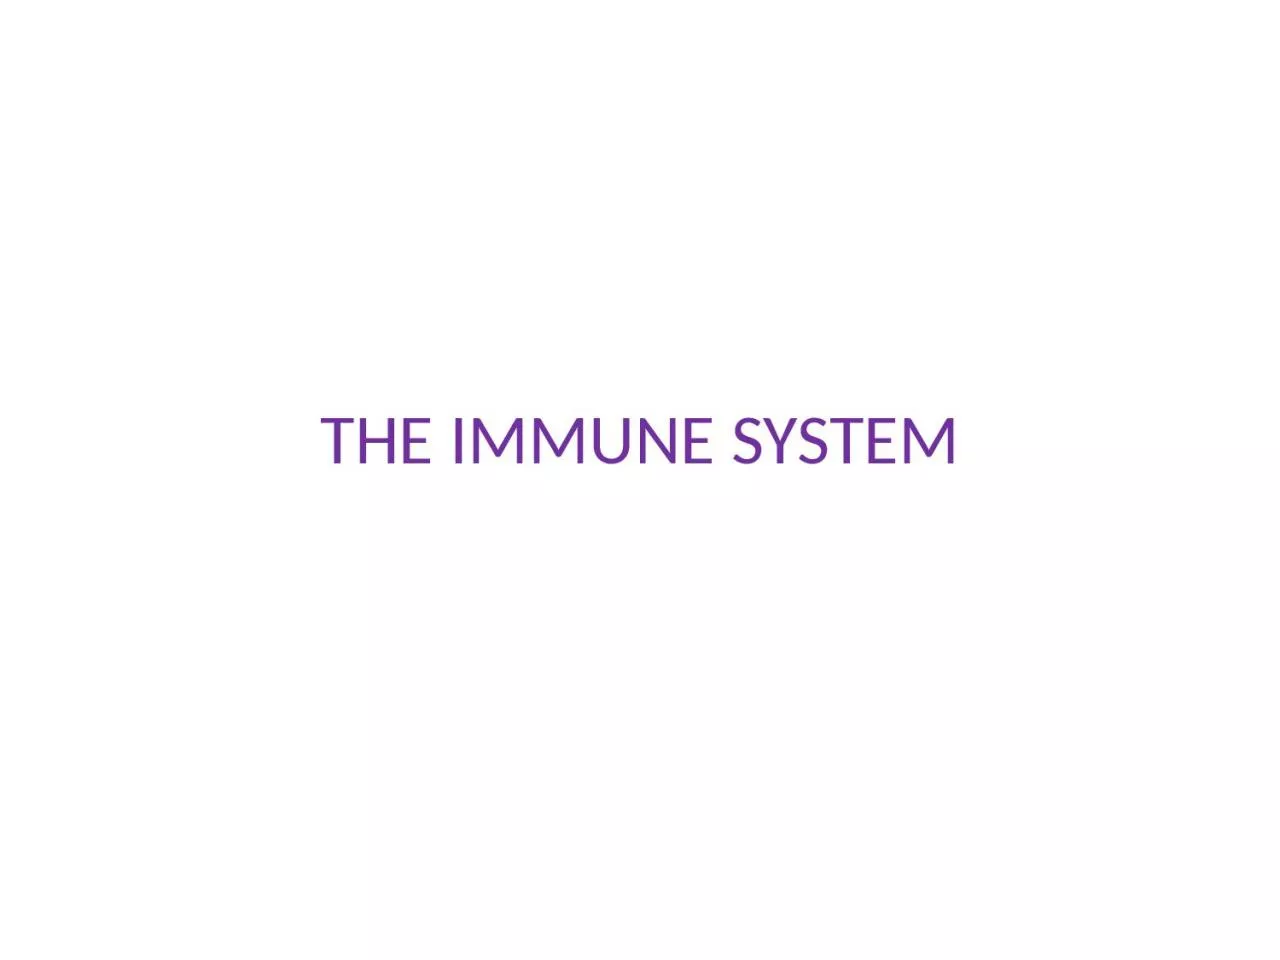 THE IMMUNE SYSTEM HOW DO BACTERIA MAKE YOU SICK AND KILL YOU?